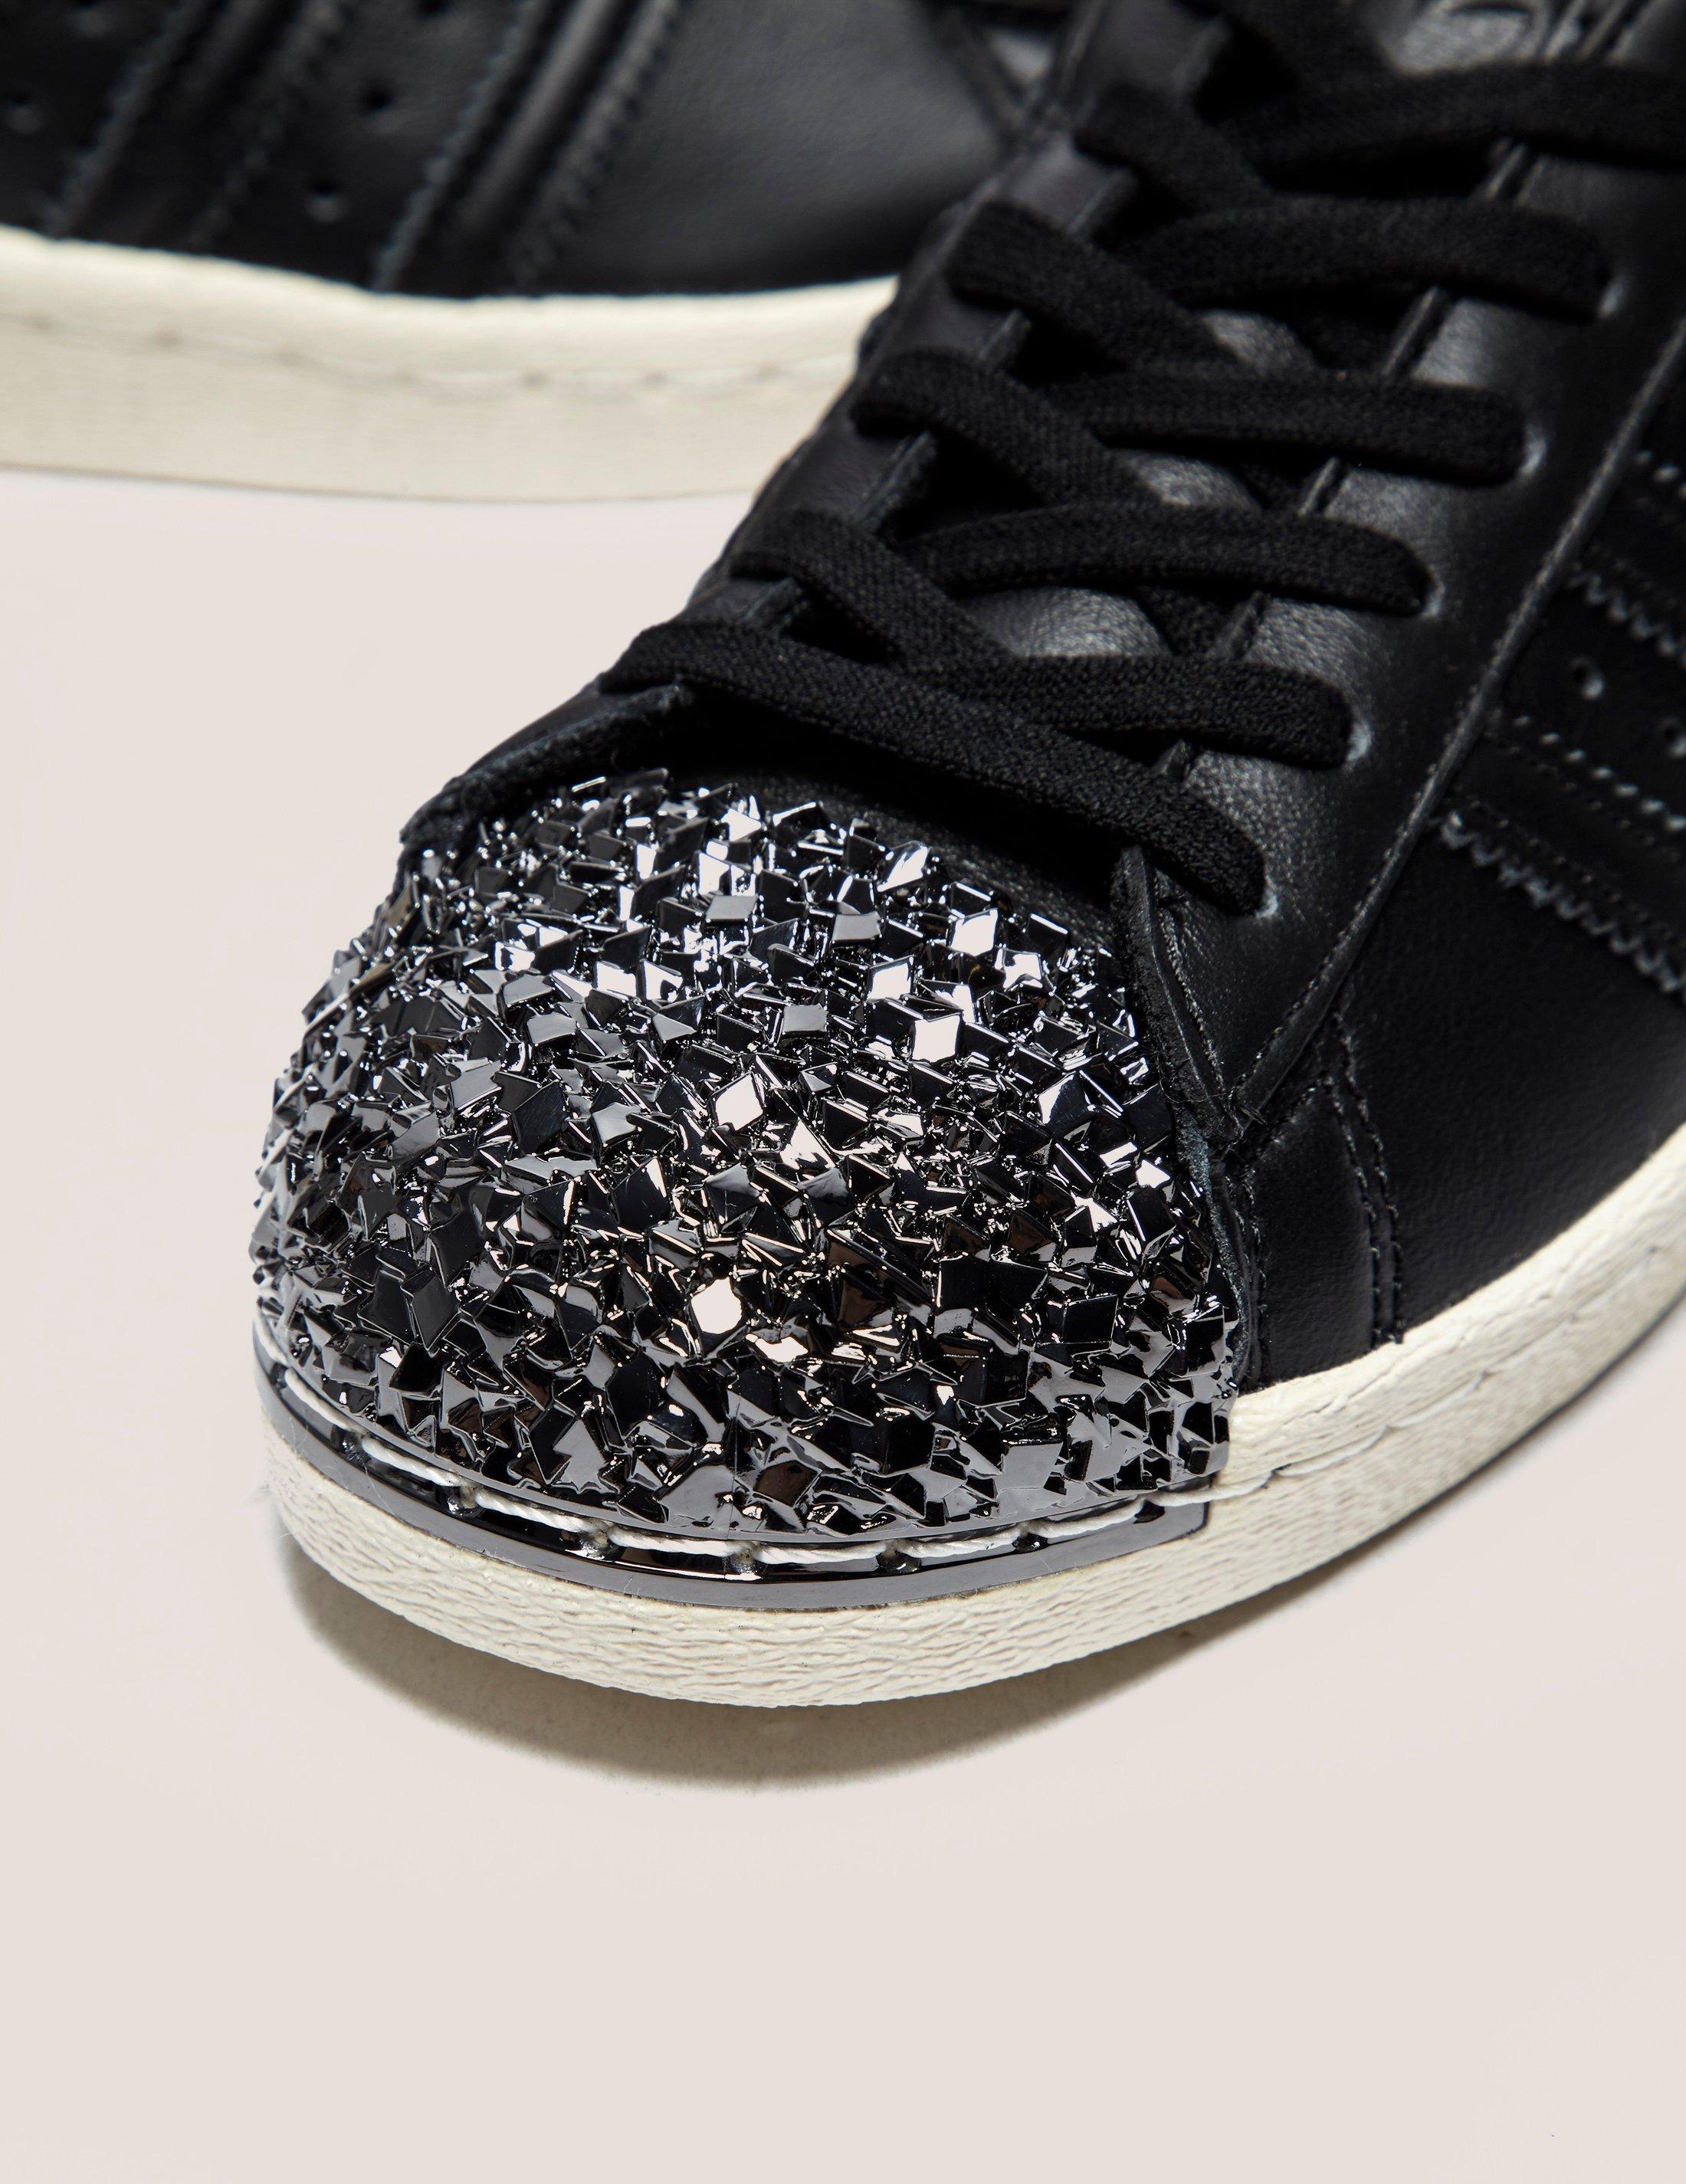 mager Silicon Generalife adidas Originals Leather Superstar 80s Metal Toe in Black - Lyst